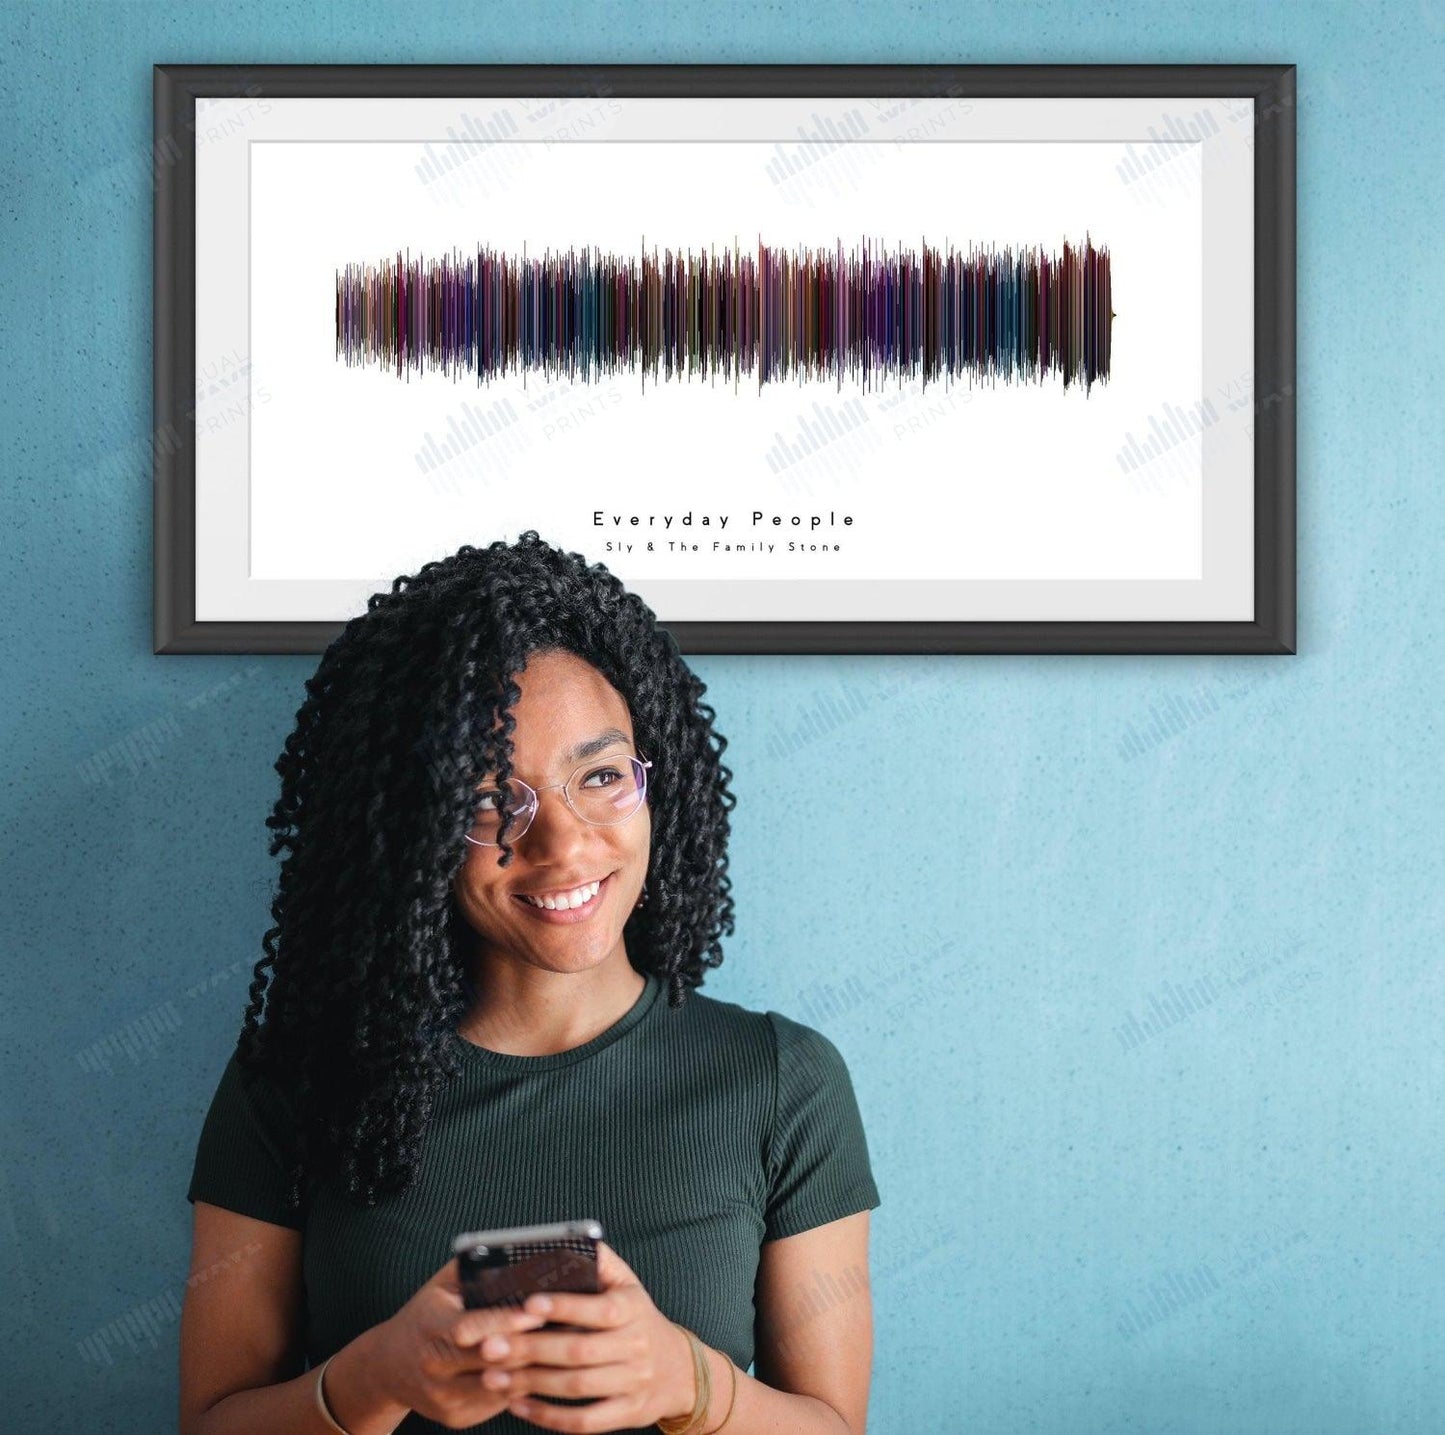 Everyday People by Sly & The Family Stone - Visual Wave Prints